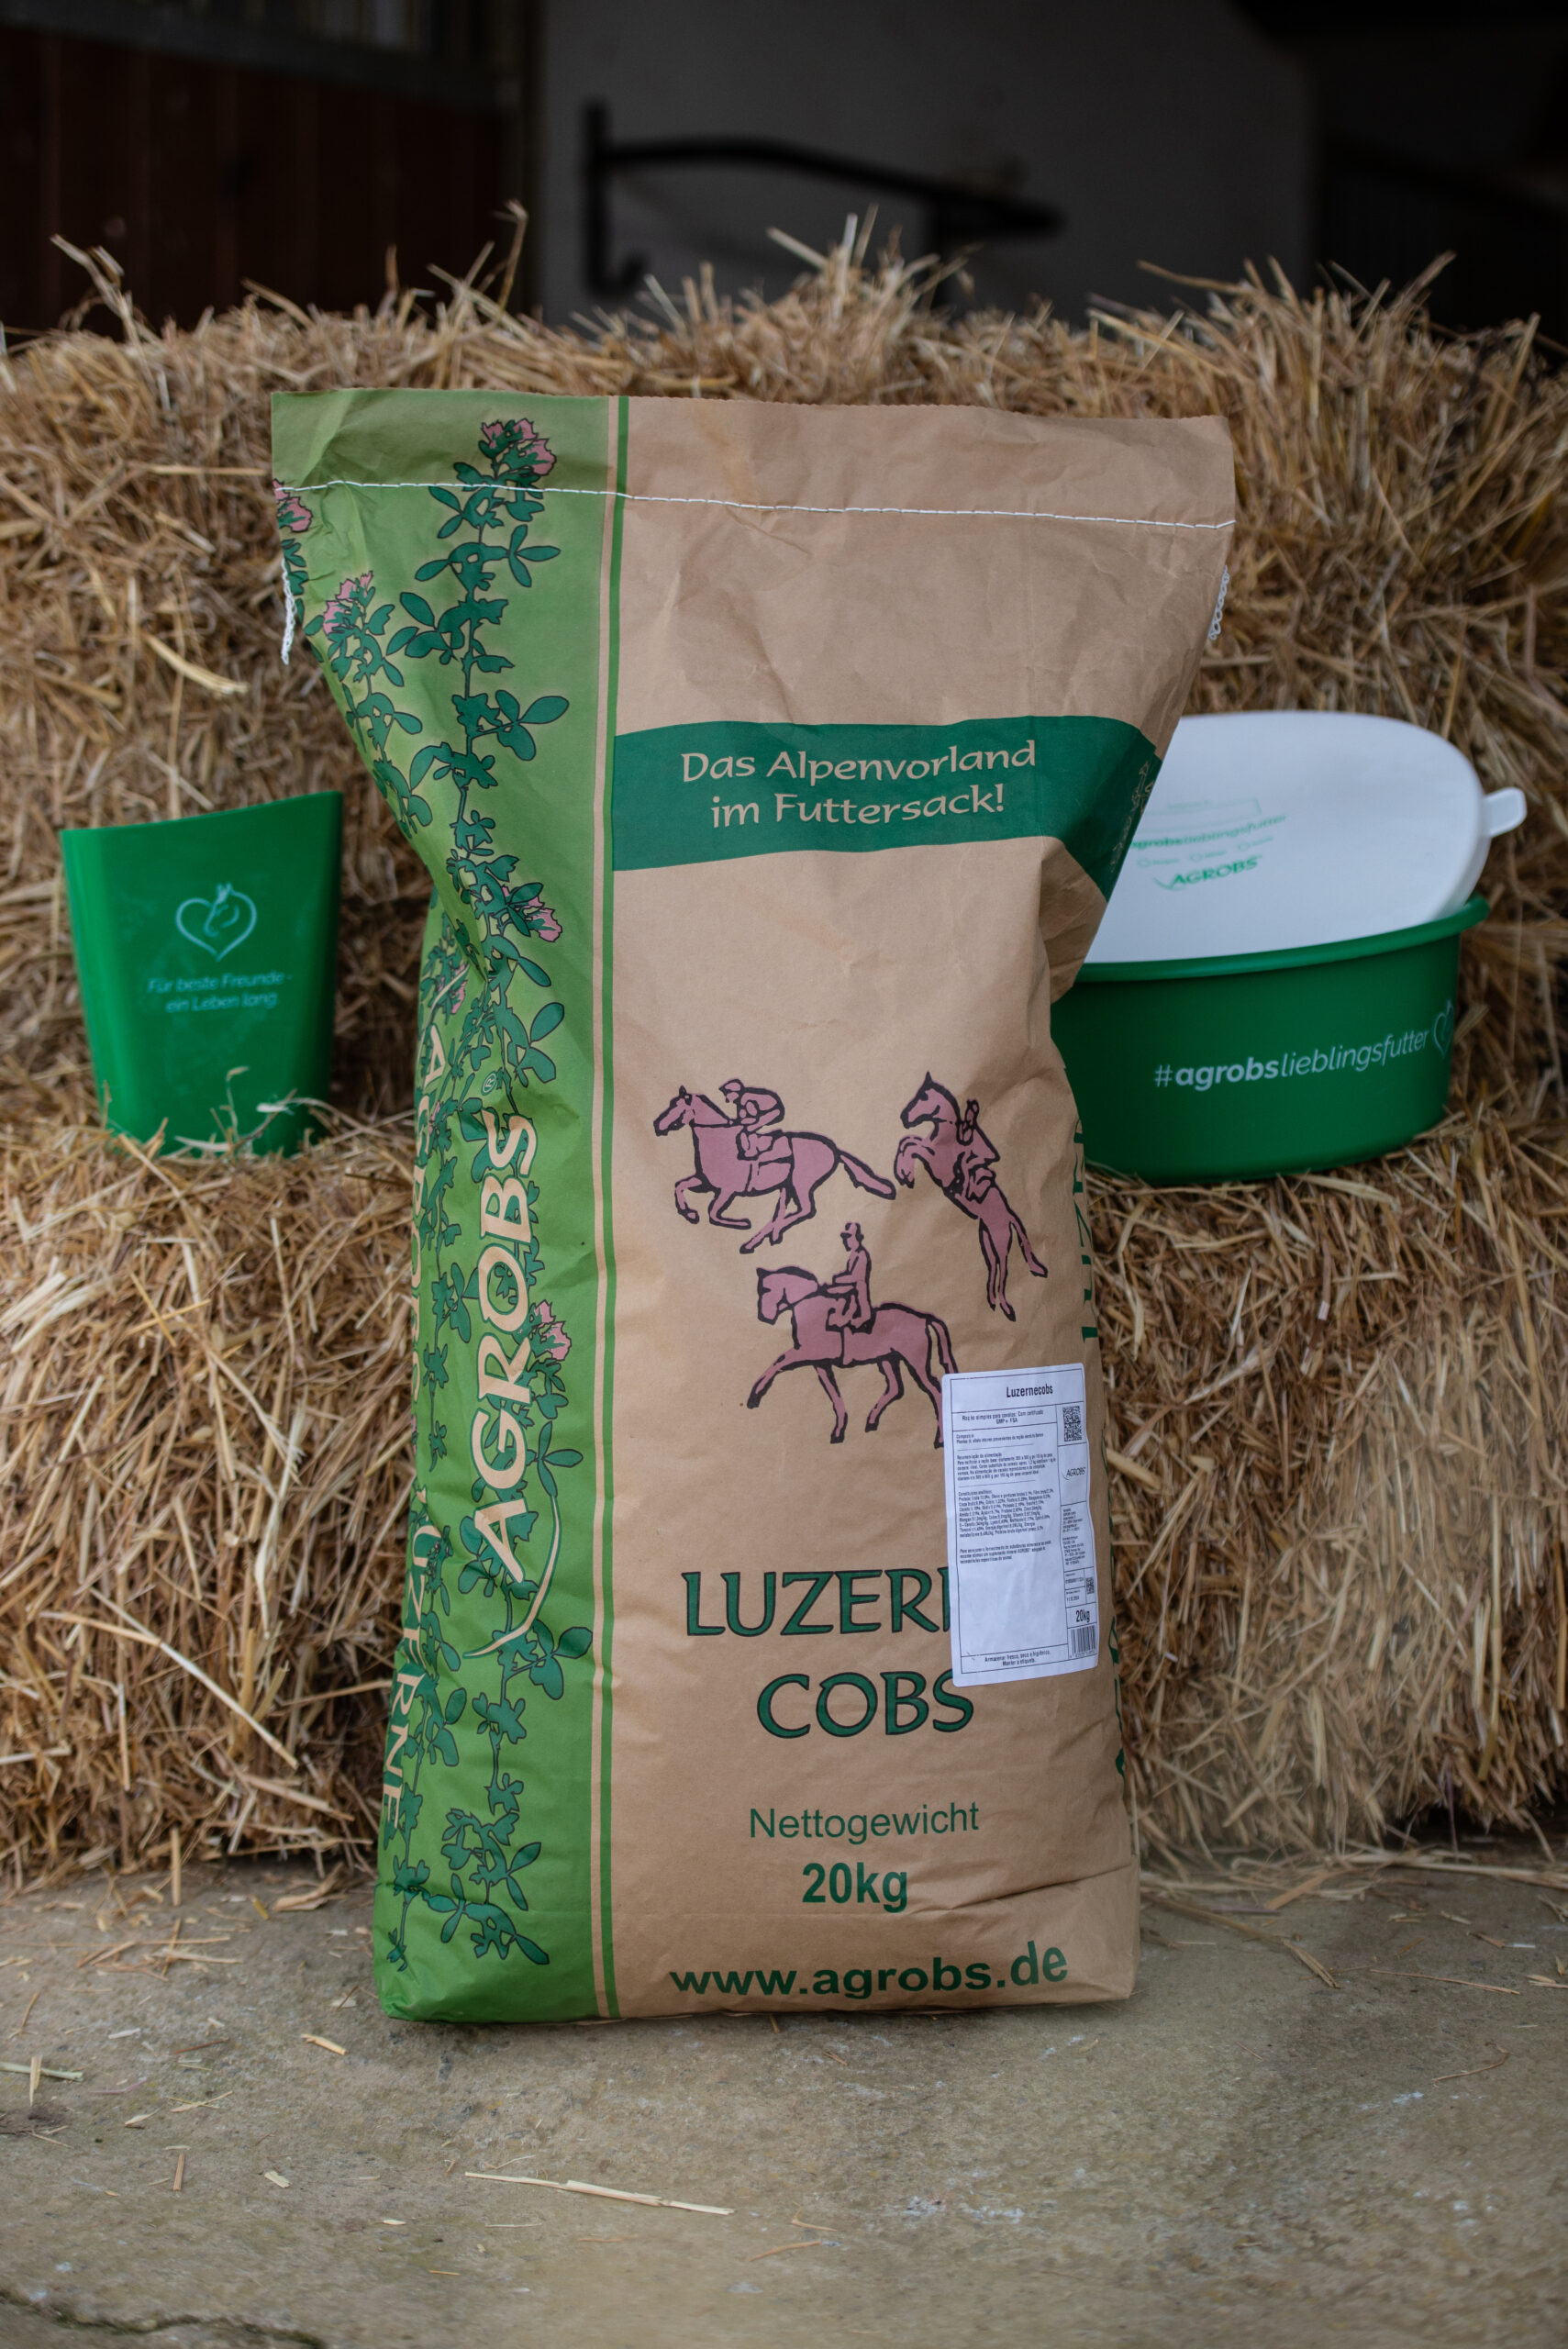 Product shot of a big paper bag of Agrobs Luzerne Cobs